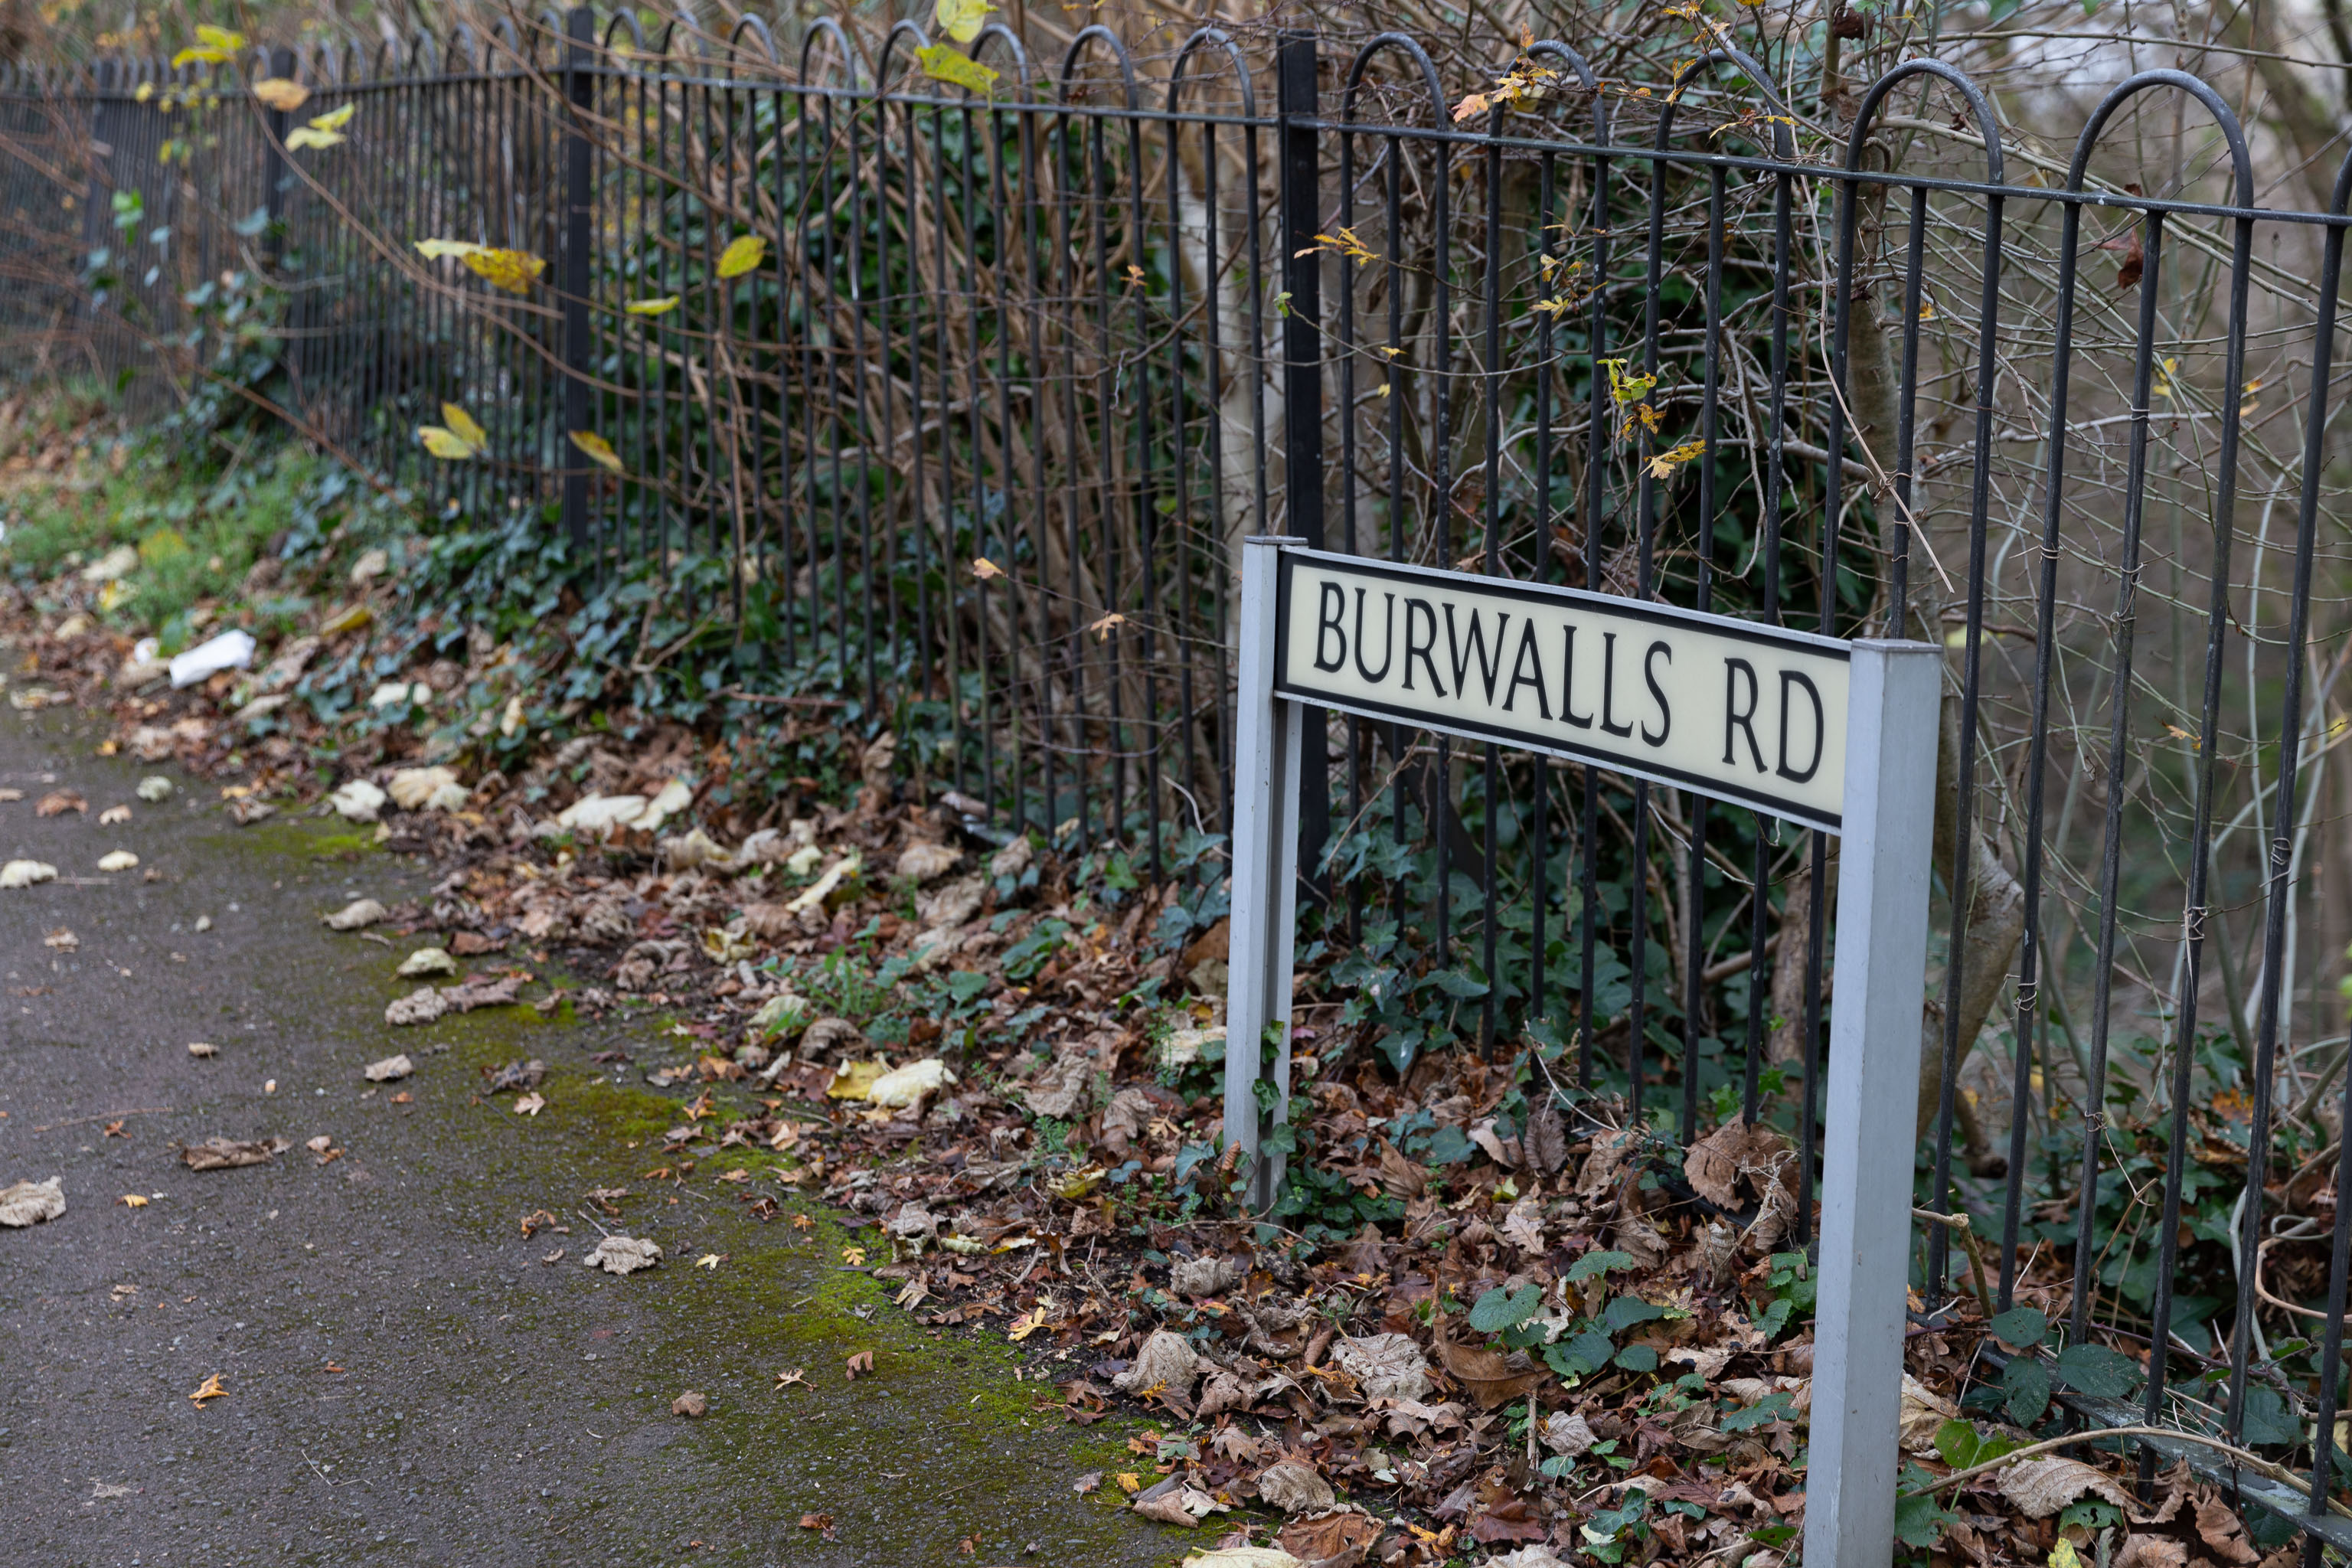 Burwalls Road
My destination. It is not glamorous, but it needed ticking off the list.
